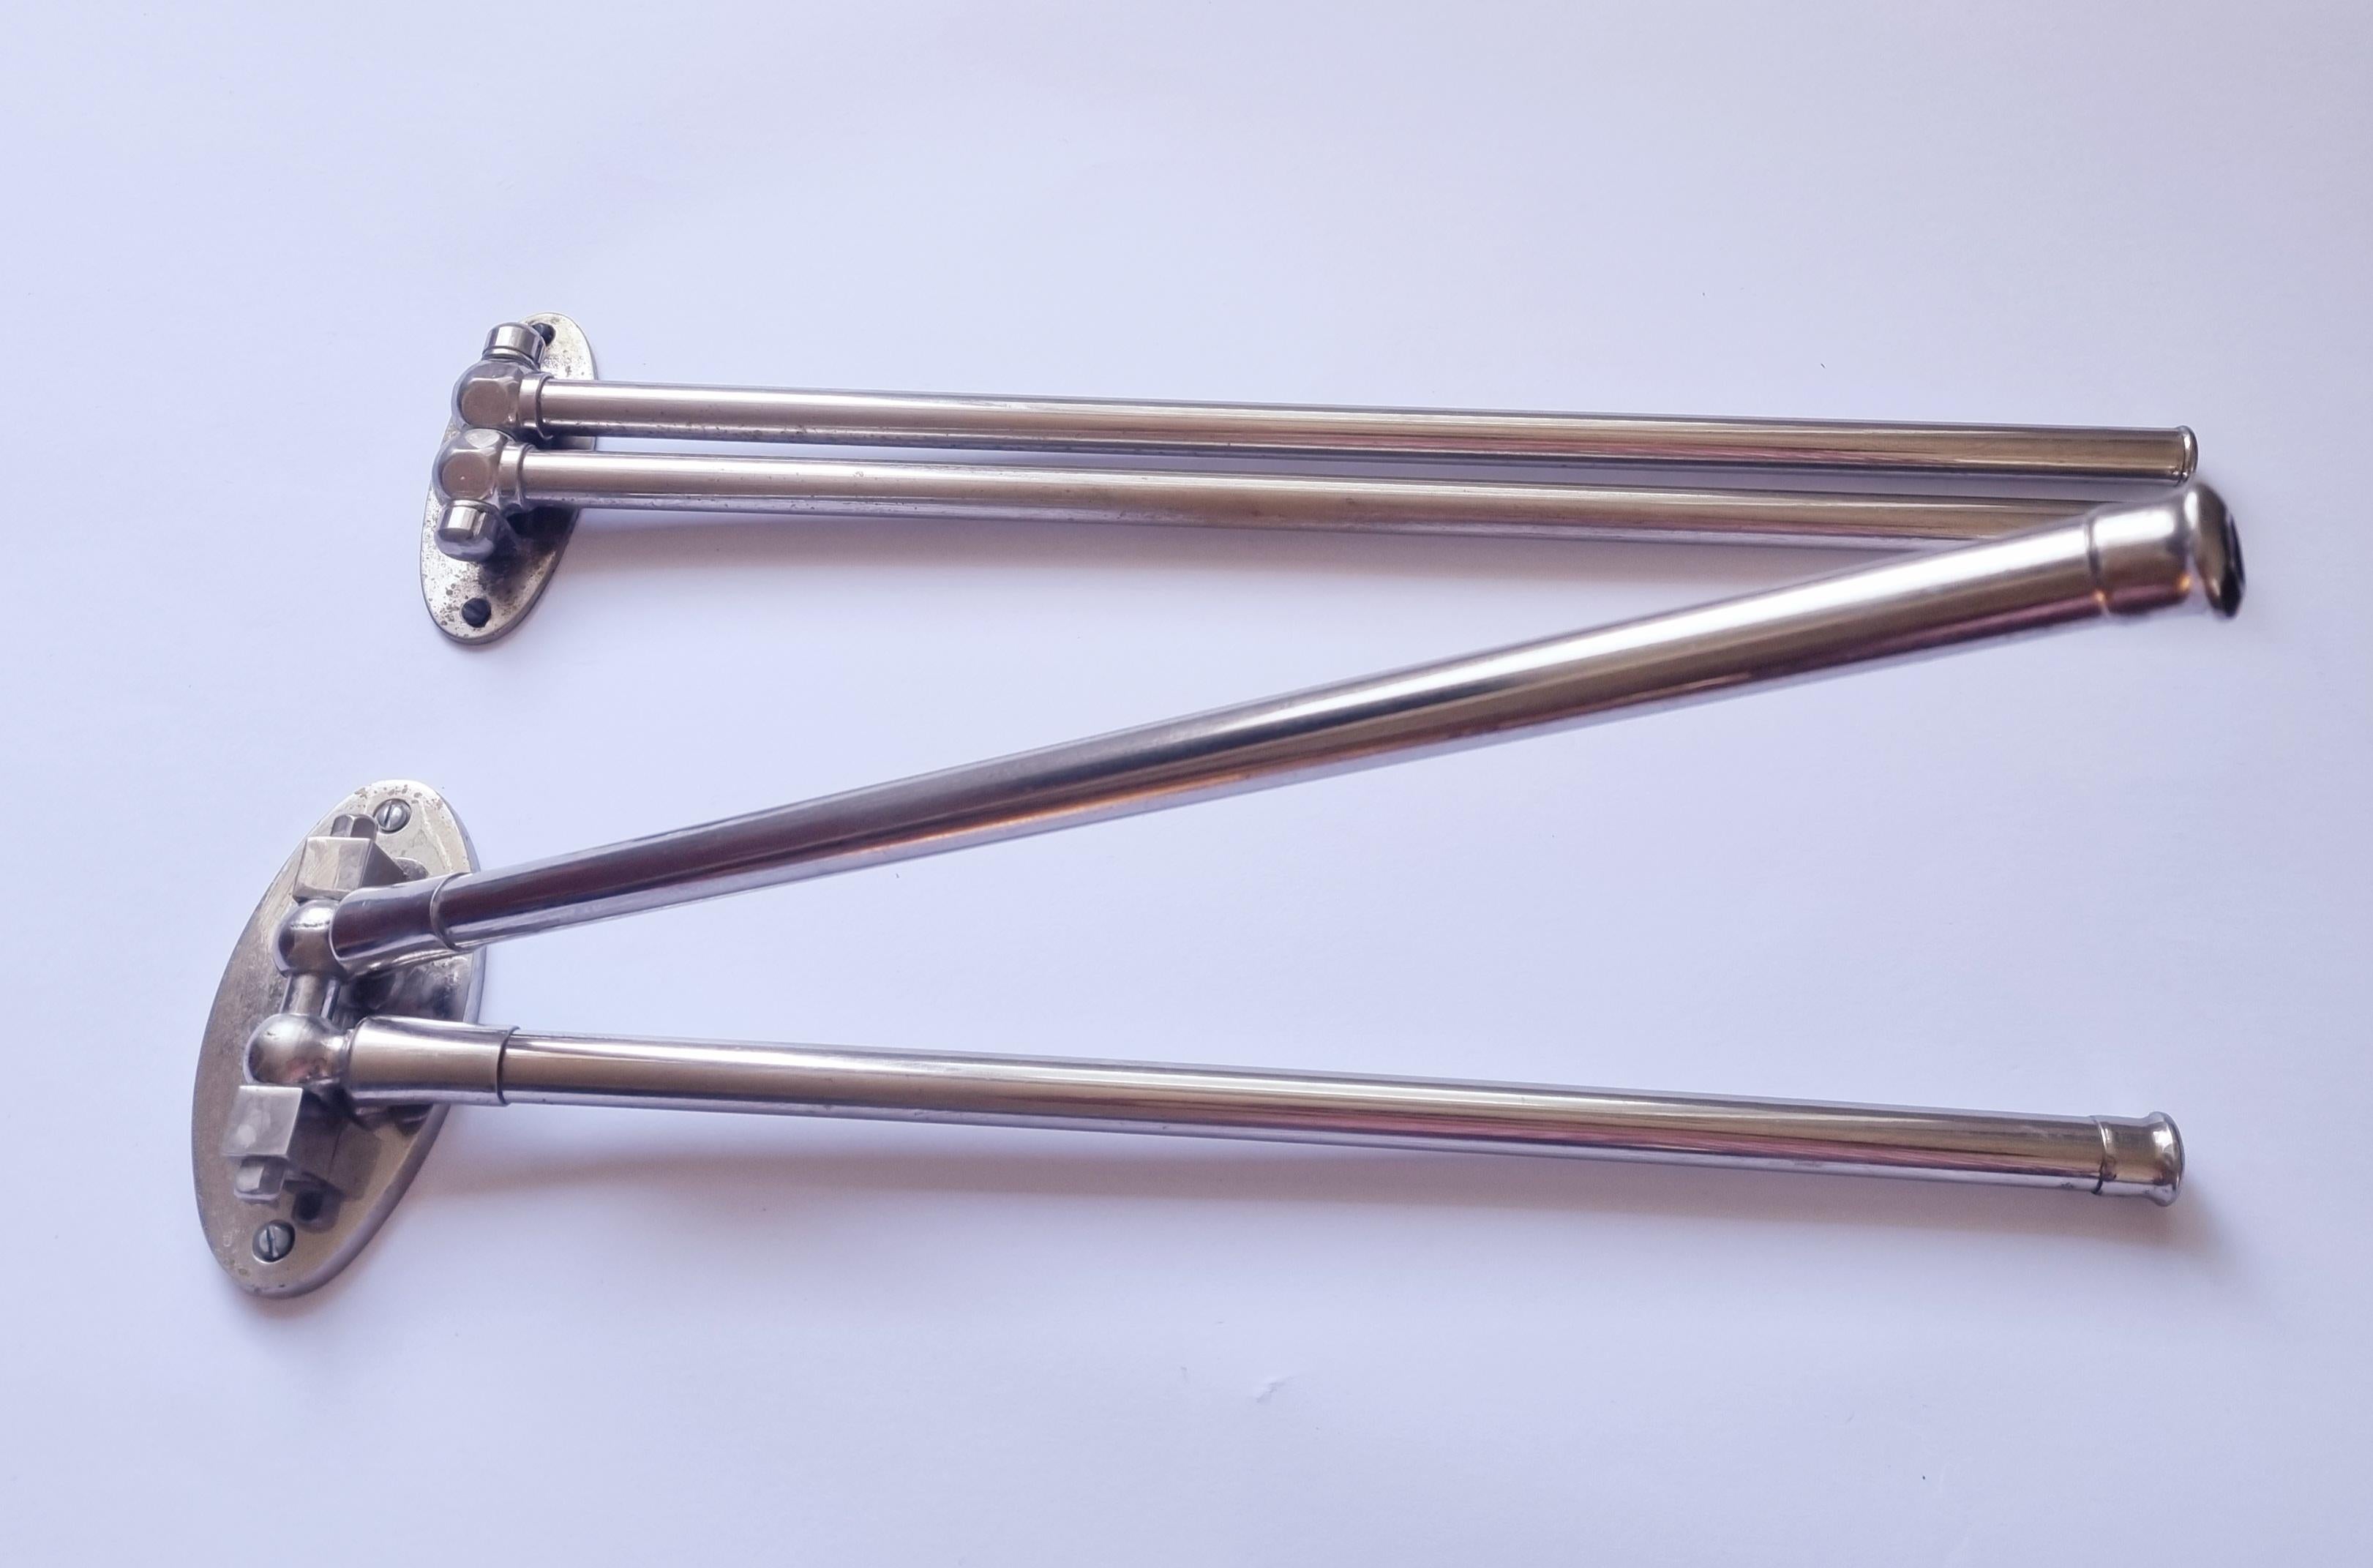 Set of Two Functionalism, Art Deco Chrome Towel Holders, 1930s For Sale 7